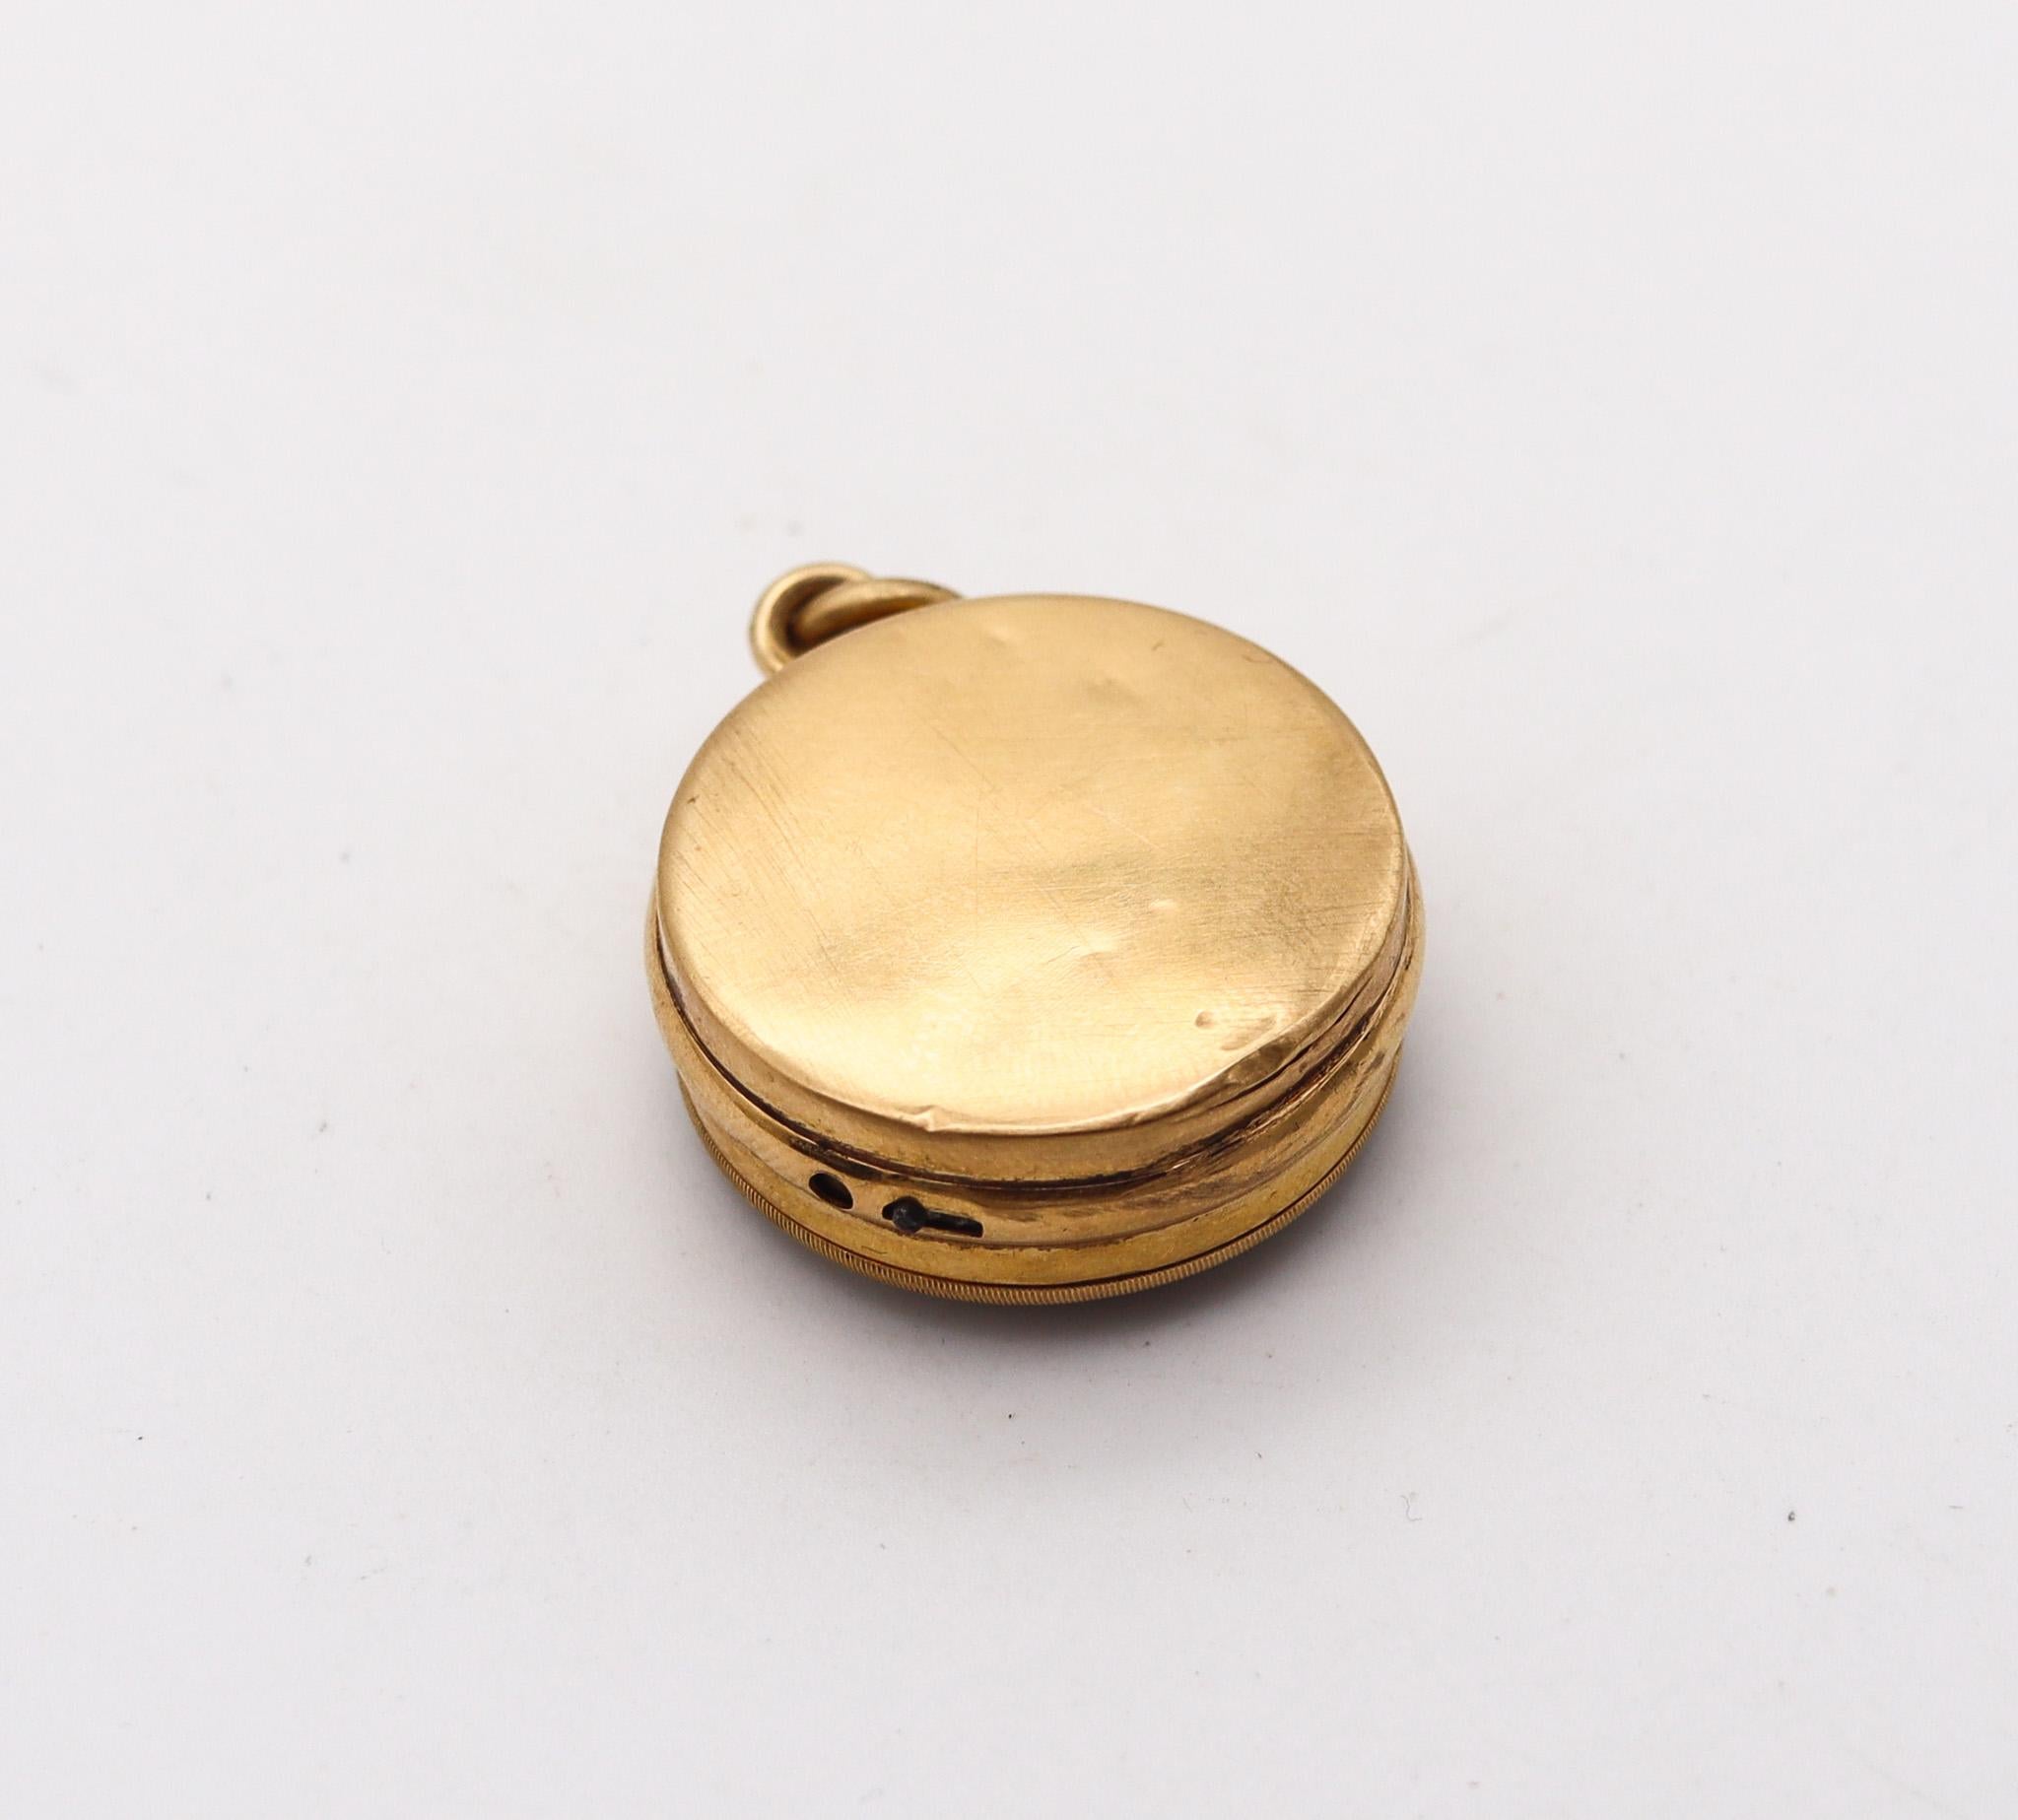 England 1880 Victorian Pocket Barometer Pendant-Charm In 18Kt Yellow Gold For Sale 1